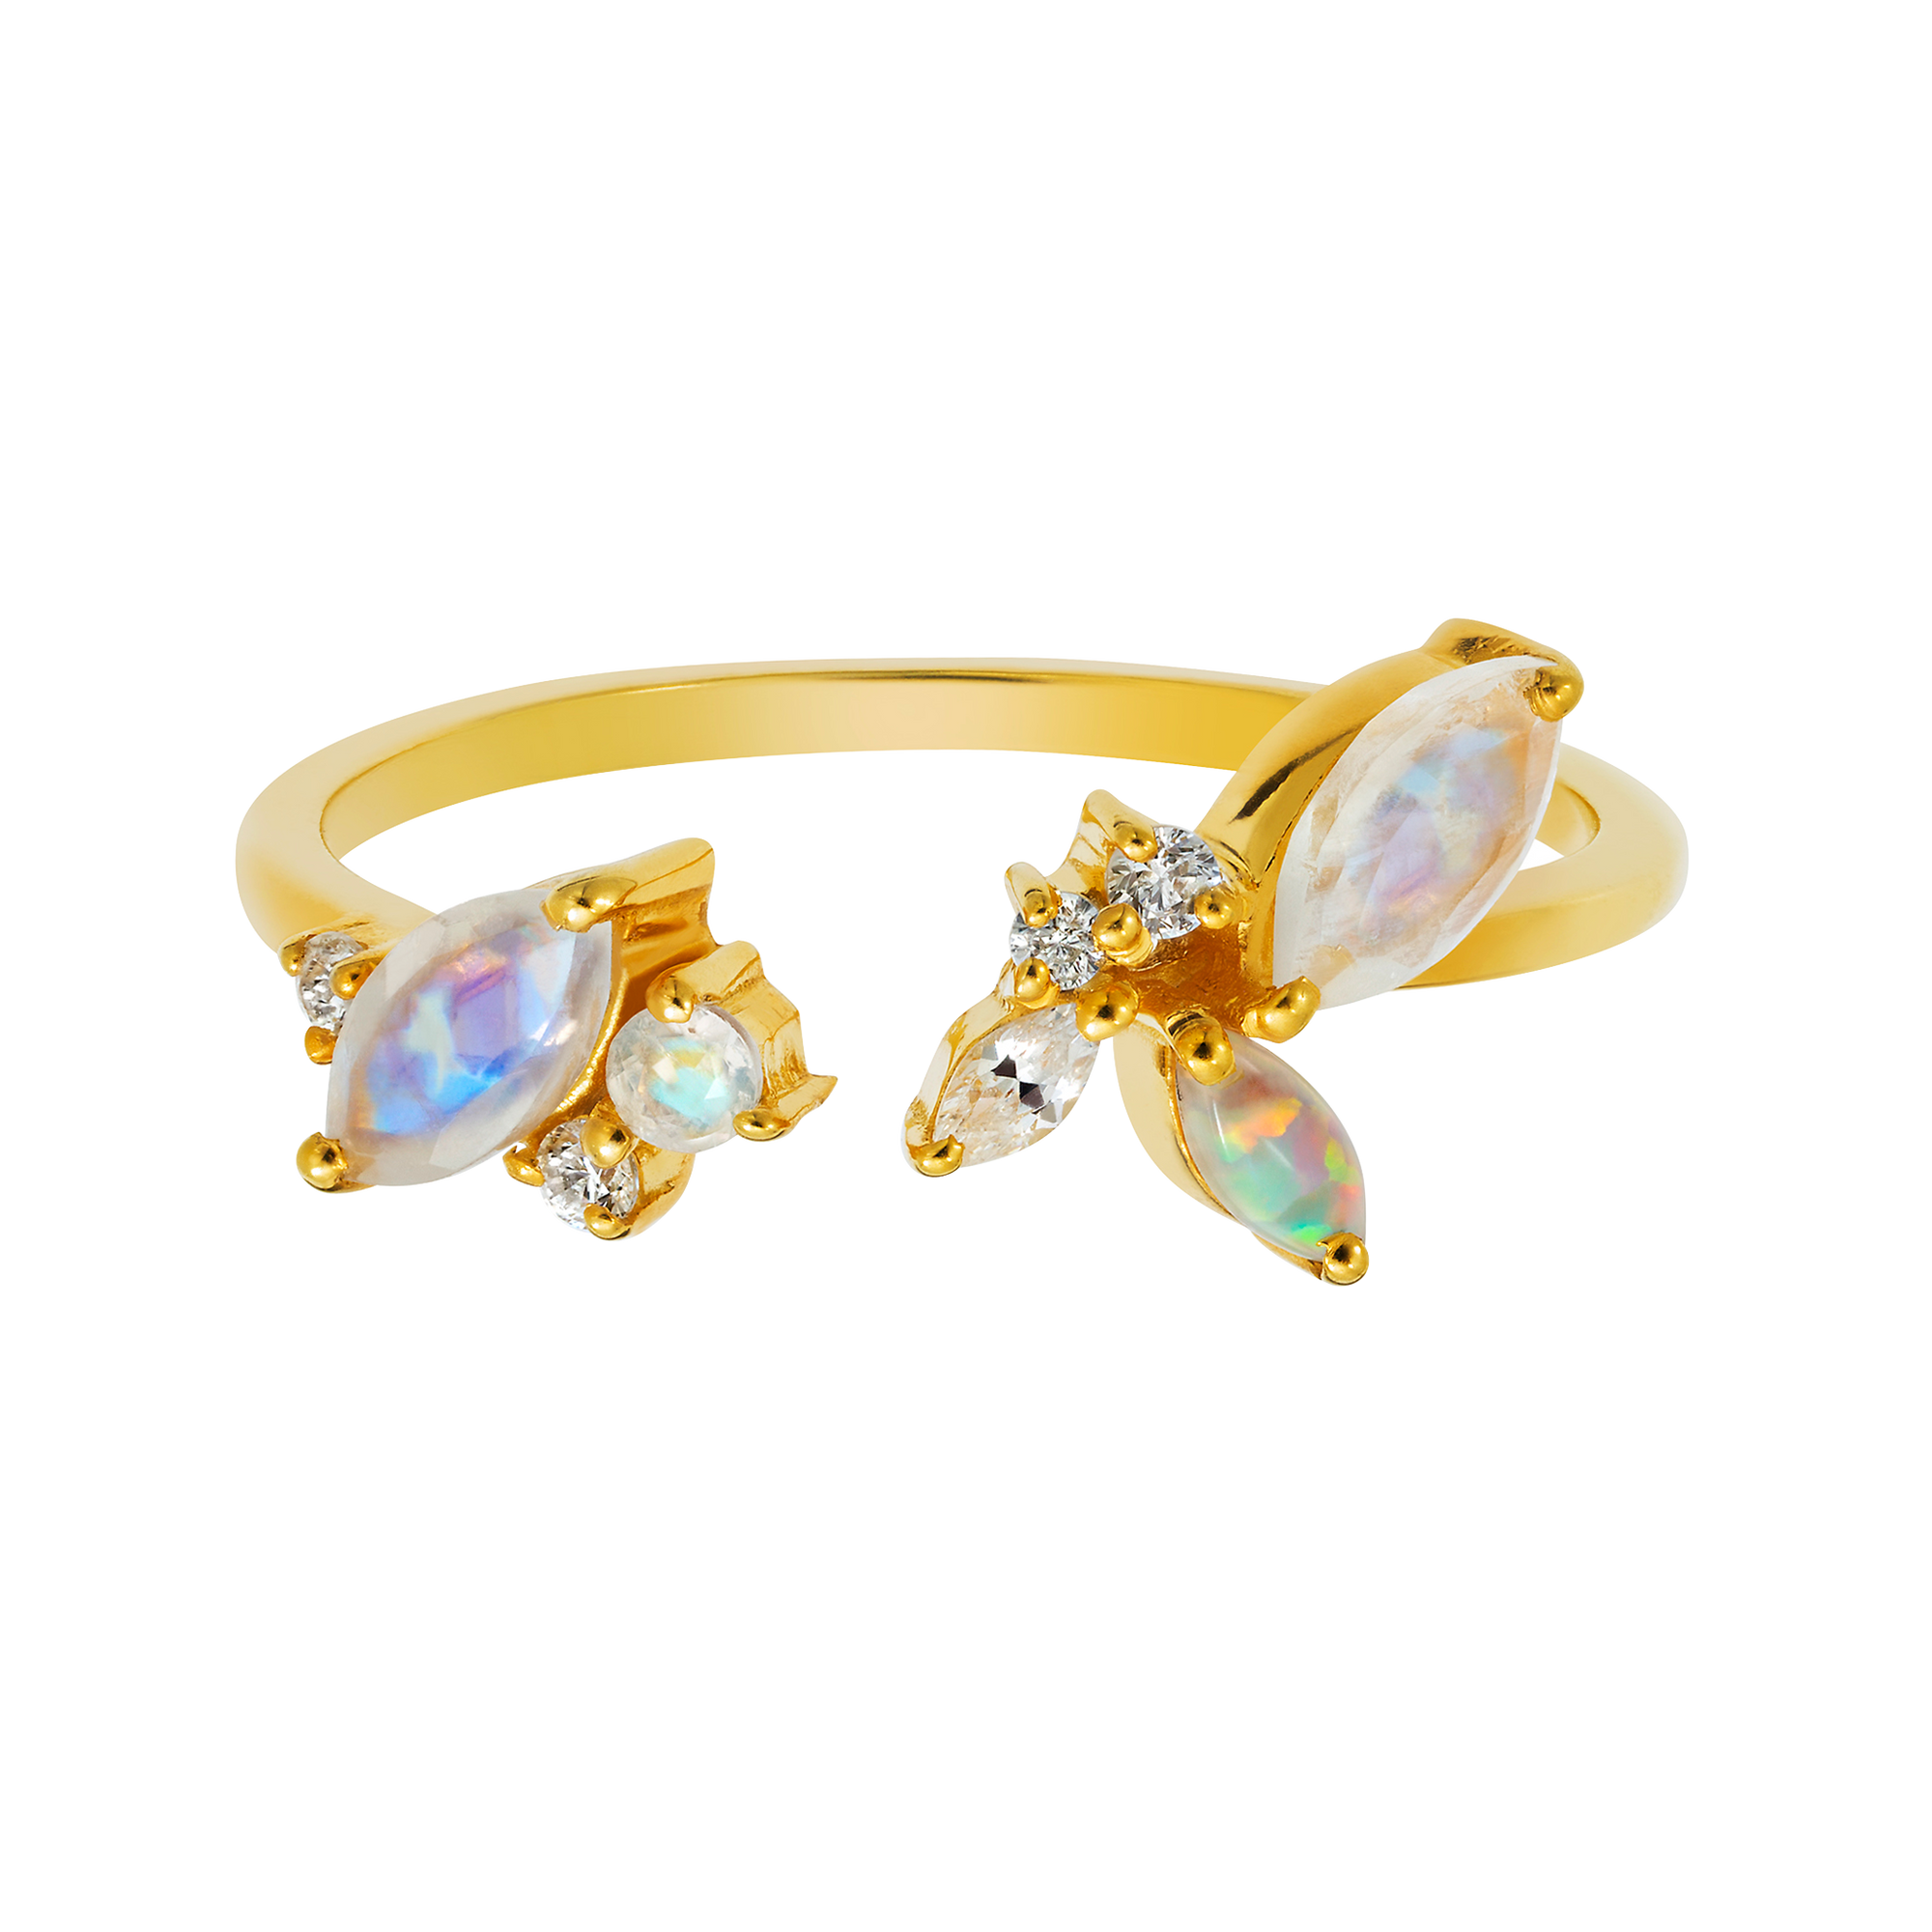 Rainbow Moonstone, Opal and Diamond Picasso's Butterfly Ring